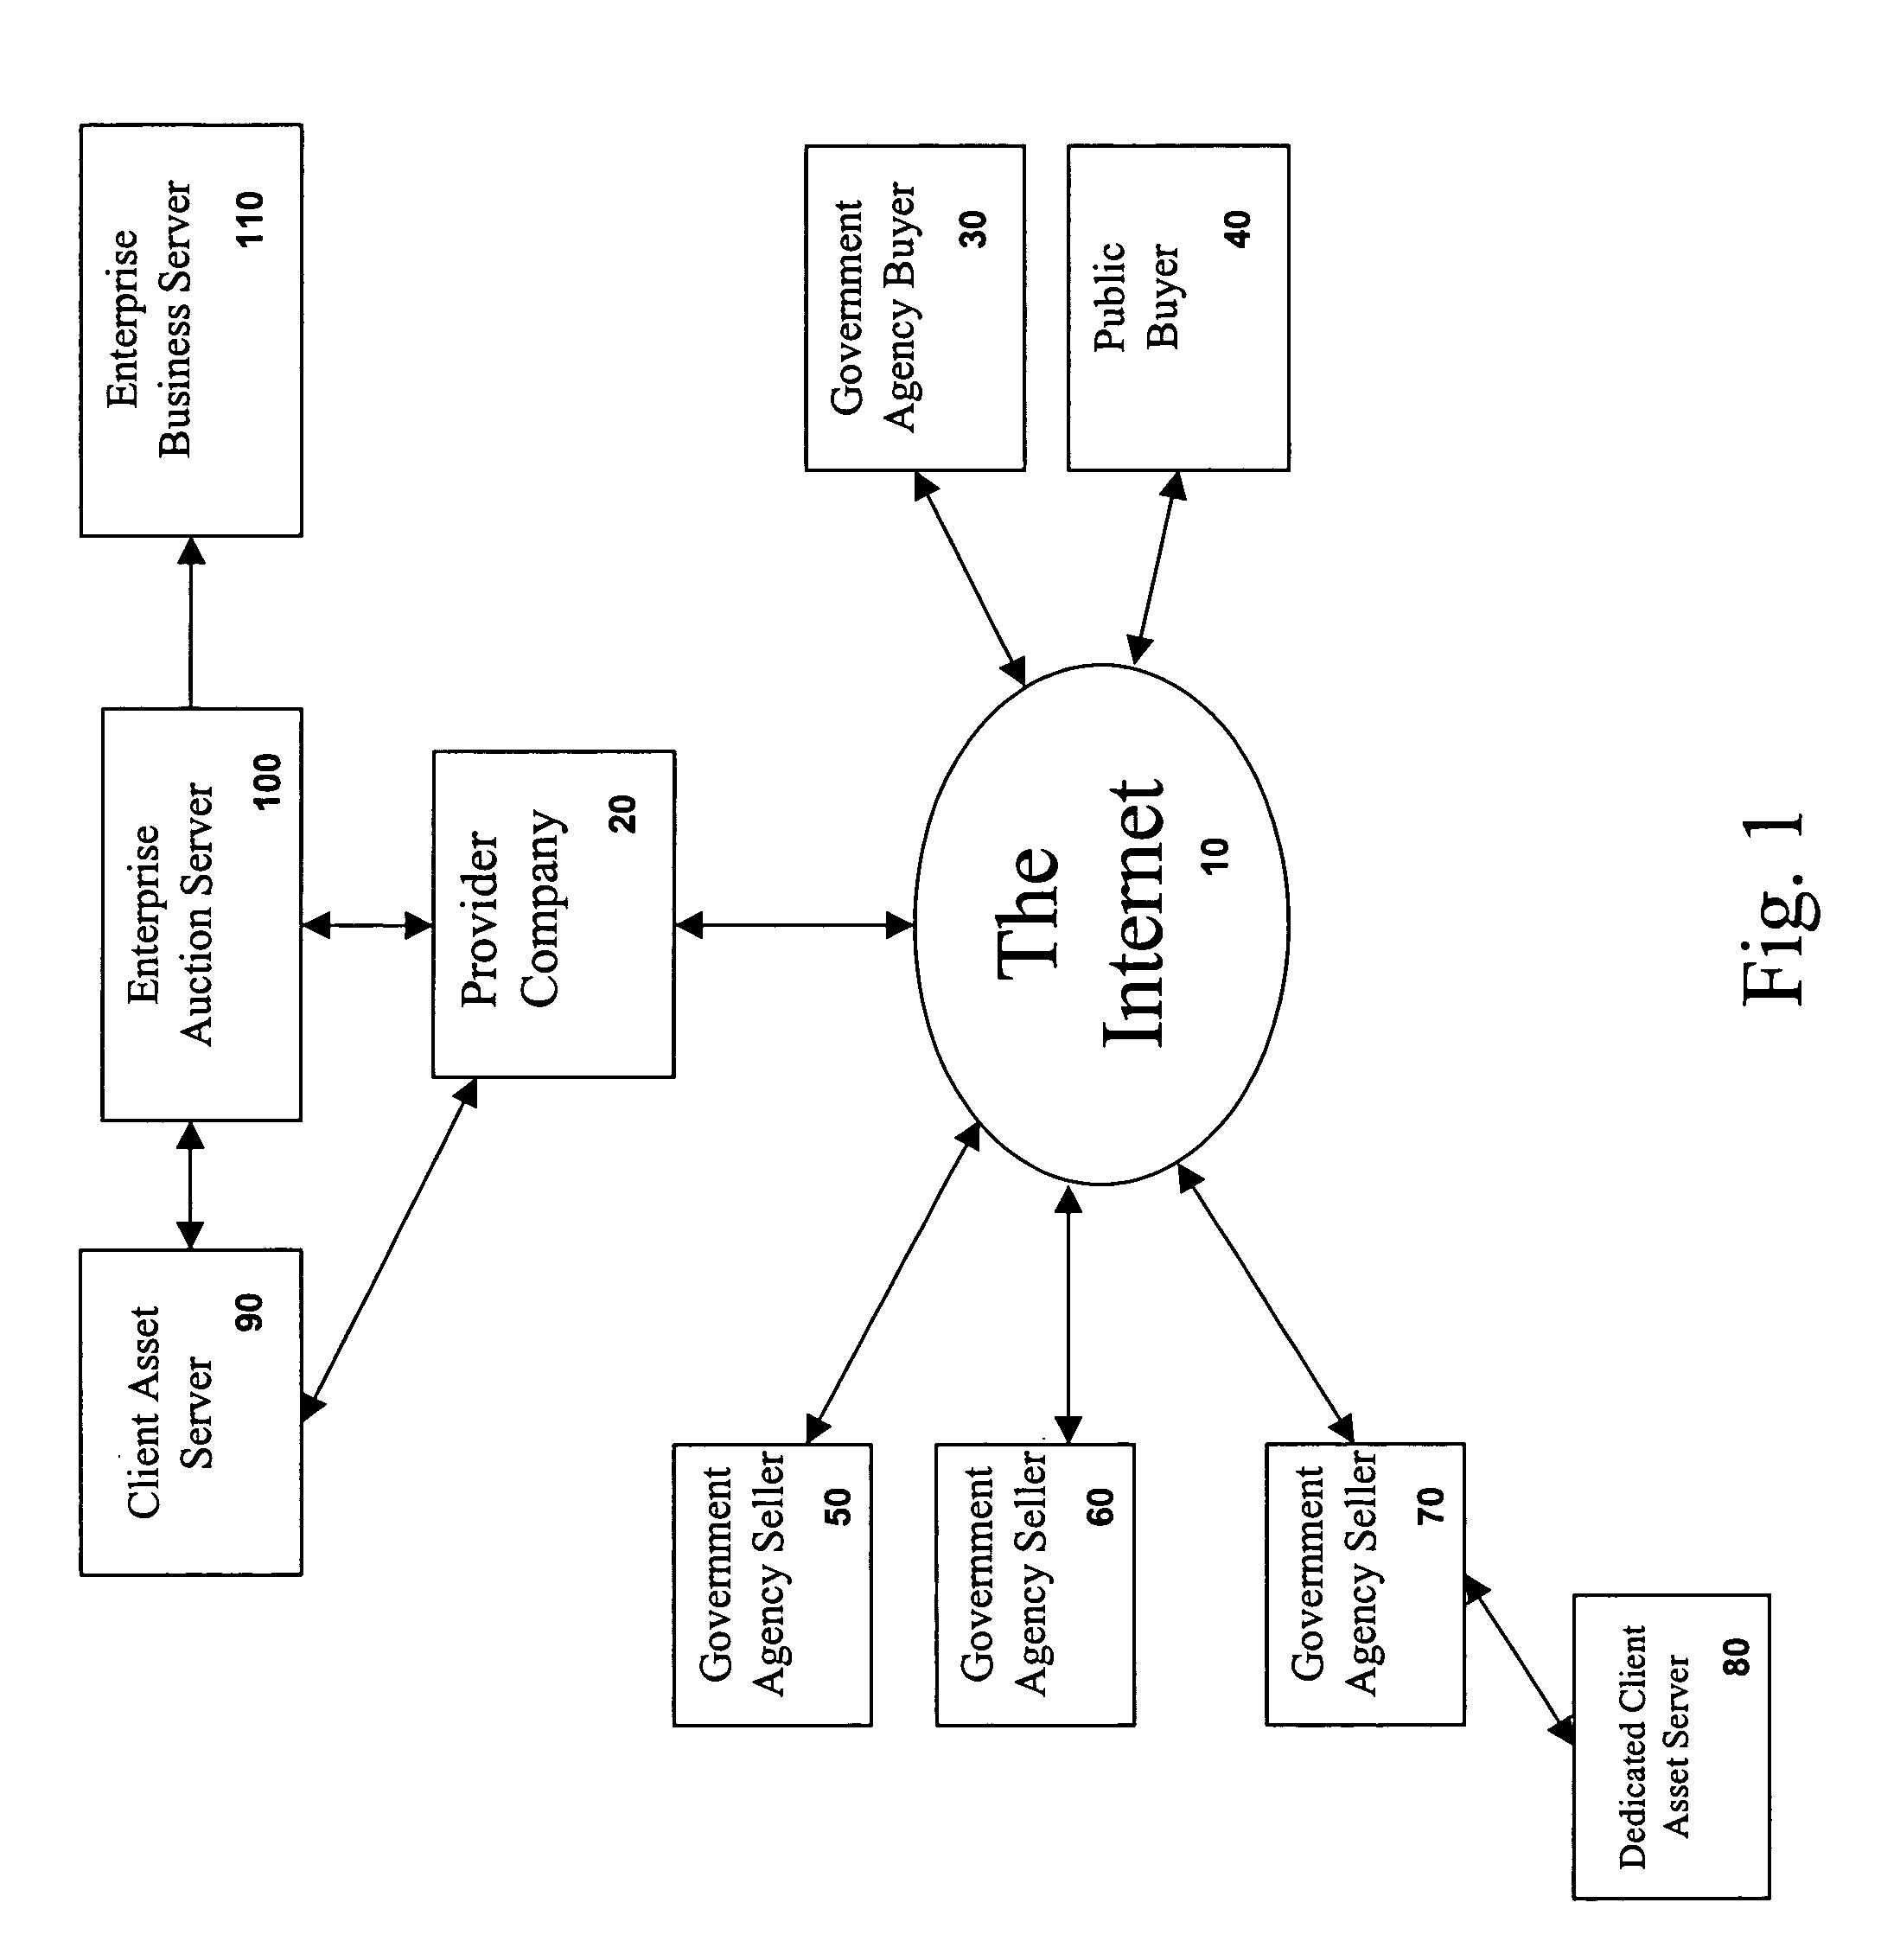 Method for conducting a computerized government auction